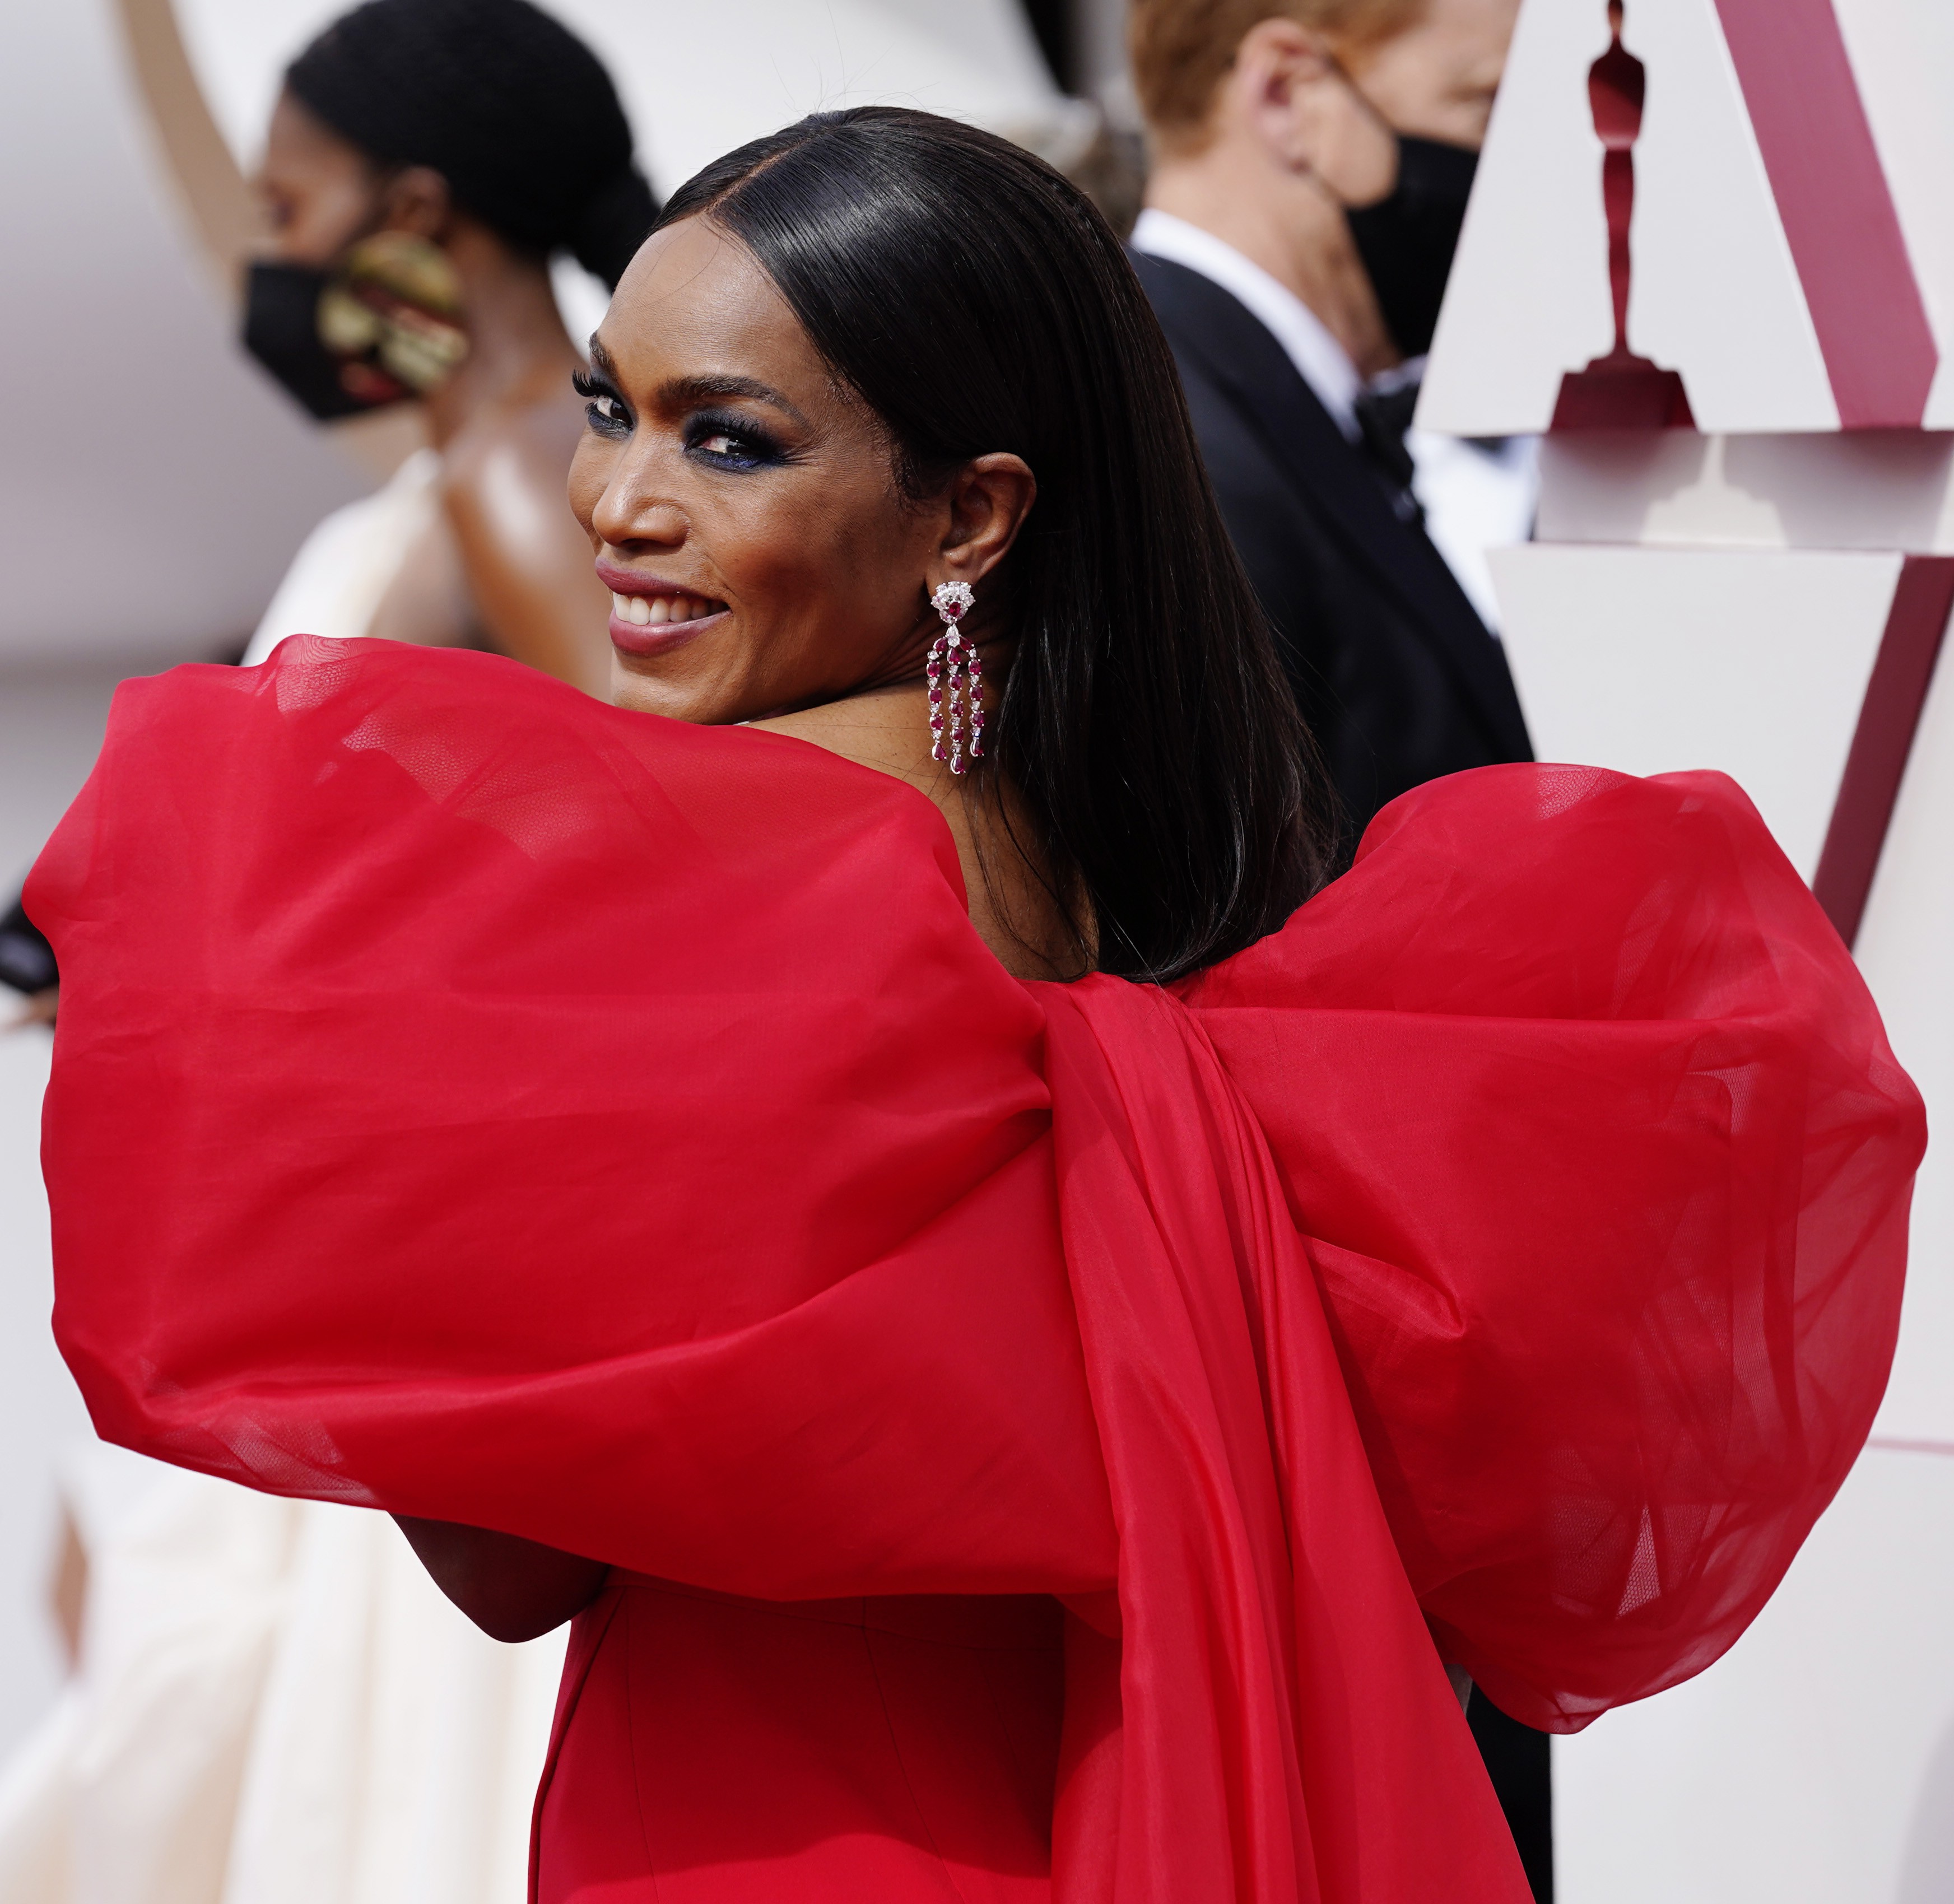 LOS ANGELES, CALIFORNIA – APRIL 25: Angela Bassett attends the 93rd Annual Academy Awards at Union Station on April 25, 2021 in Los Angeles, California. (Photo by Chris Pizzello-Pool/Getty Images) (Foto: Getty Images)